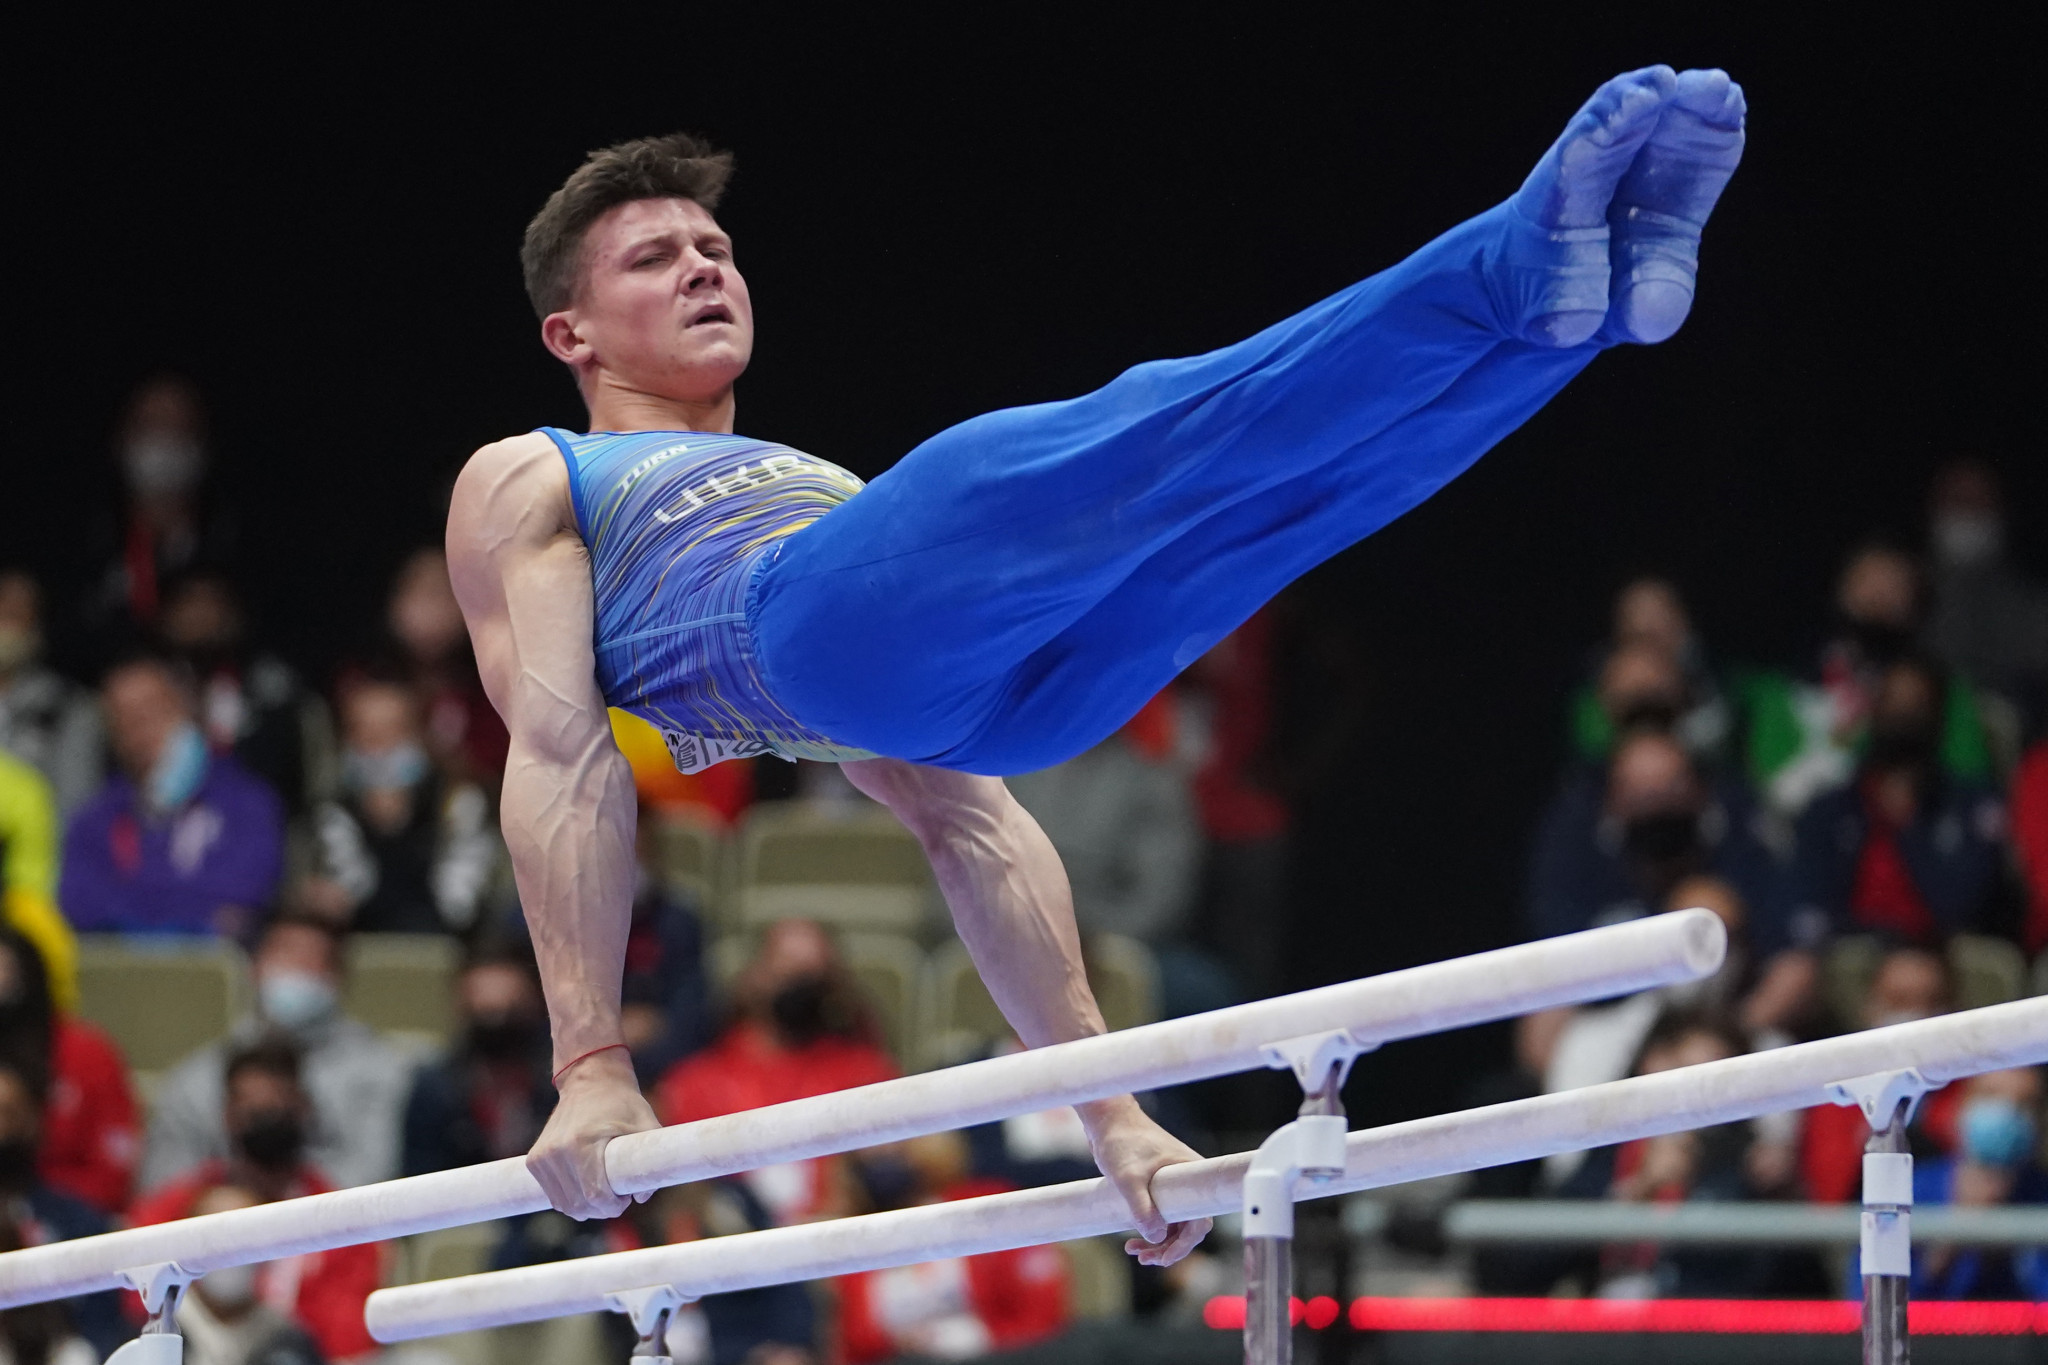 Illia Kovtun won all four men's parallel bars gold medals in this season's World Cup series ©Getty Images